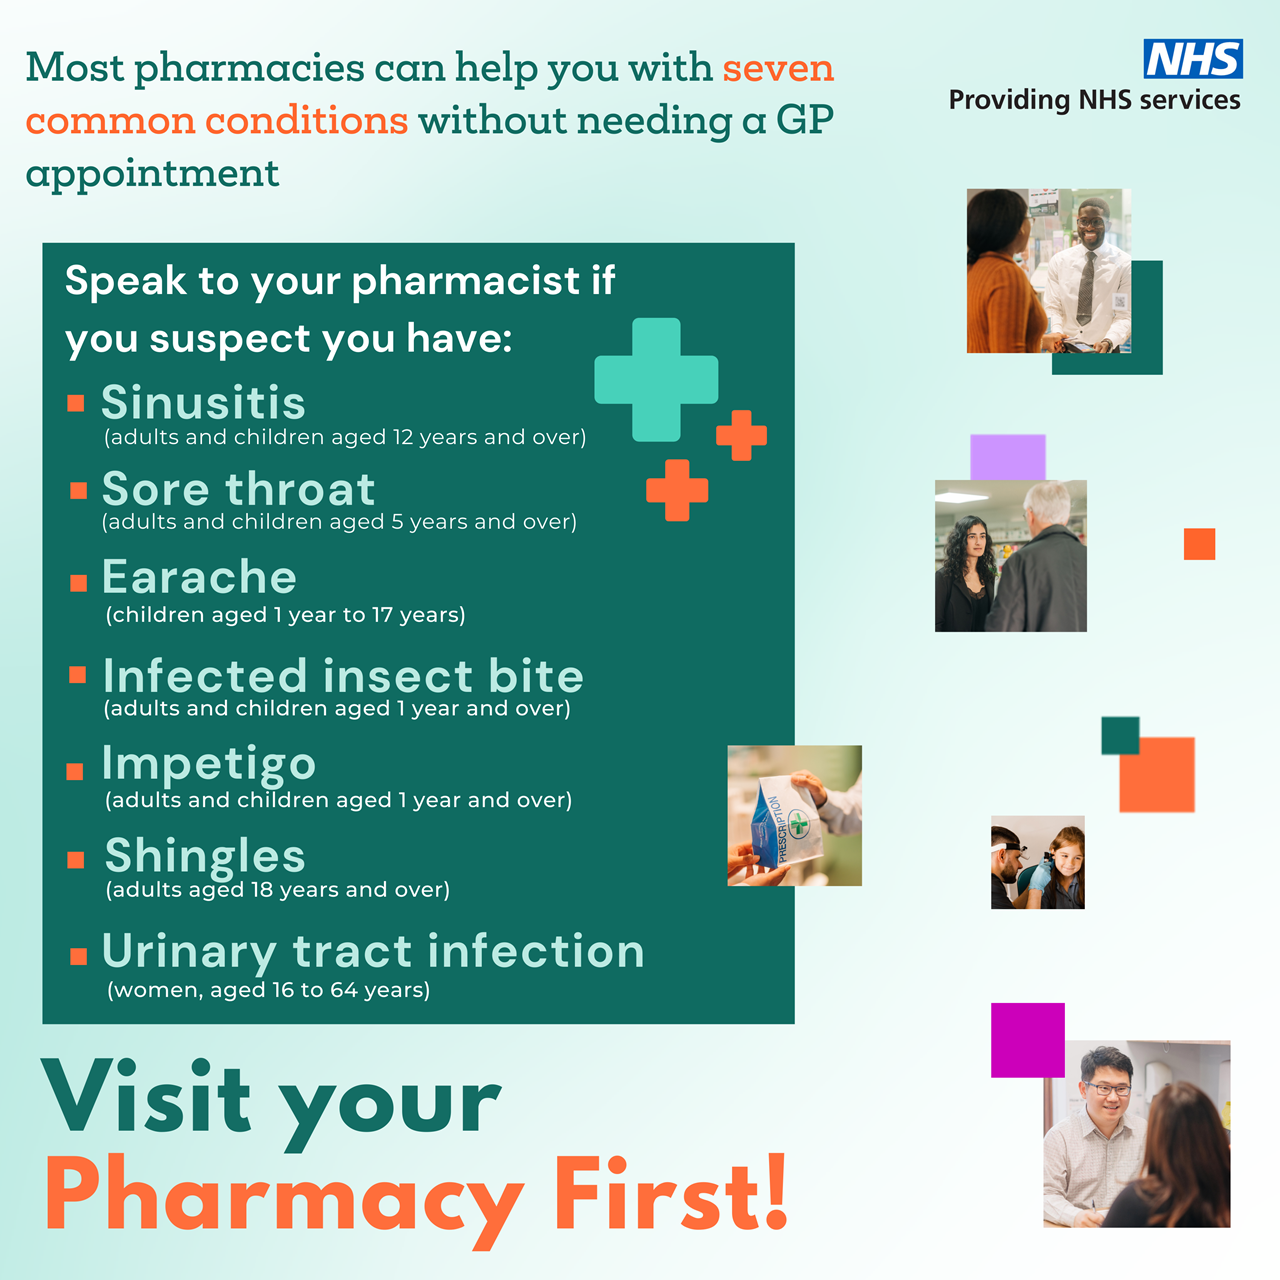 The seven common conditions that most pharmacies can help with without needing a GP appointment: sinusistis, sore throat, earache, infected insect bite, impetigo, shingles, urinary tract infection.